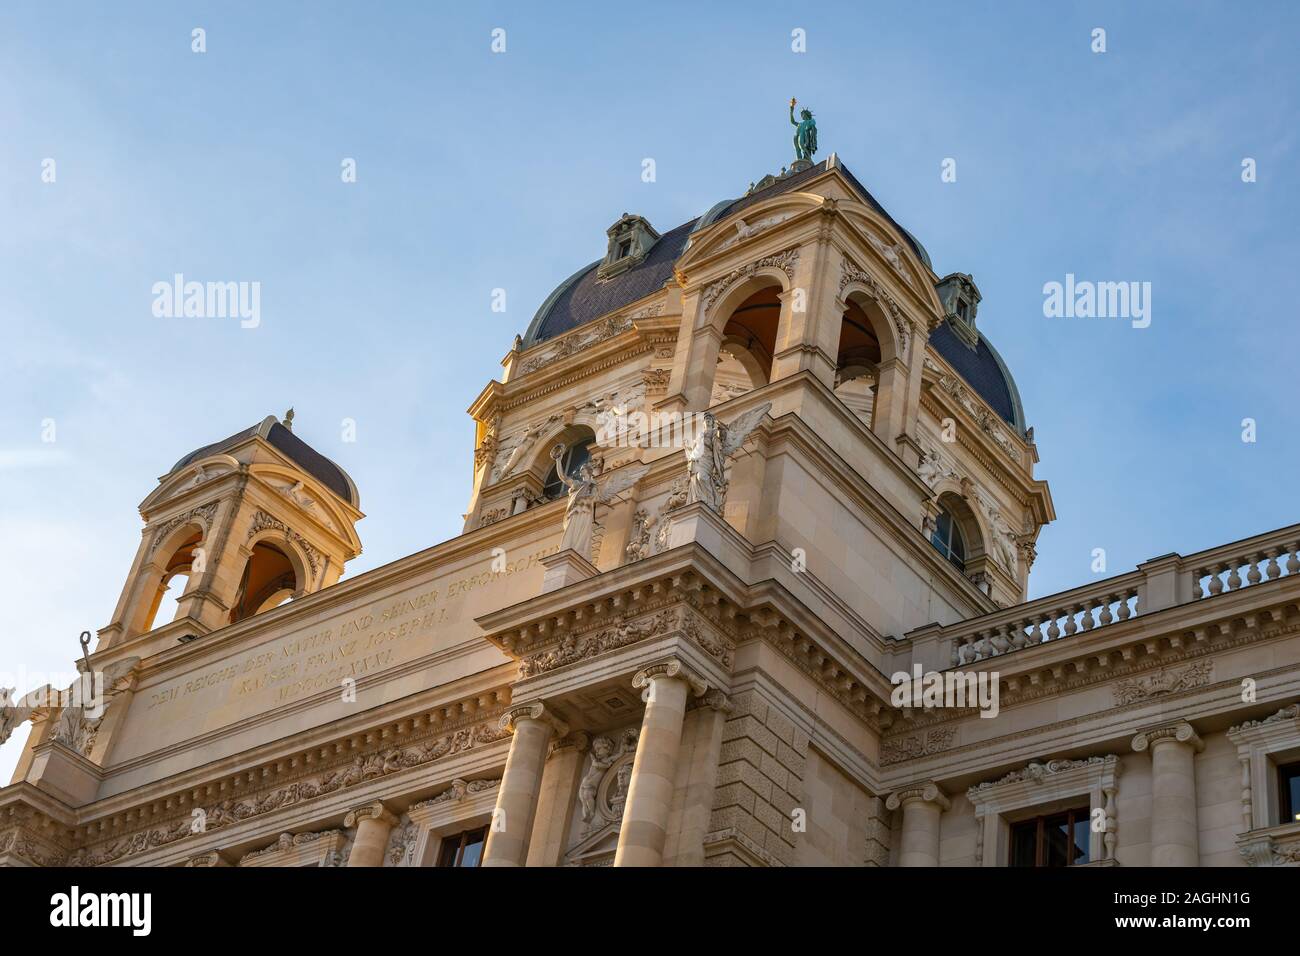 The Natural History Museum or Naturhistorisches in Vienna, Austria. Travel. Stock Photo